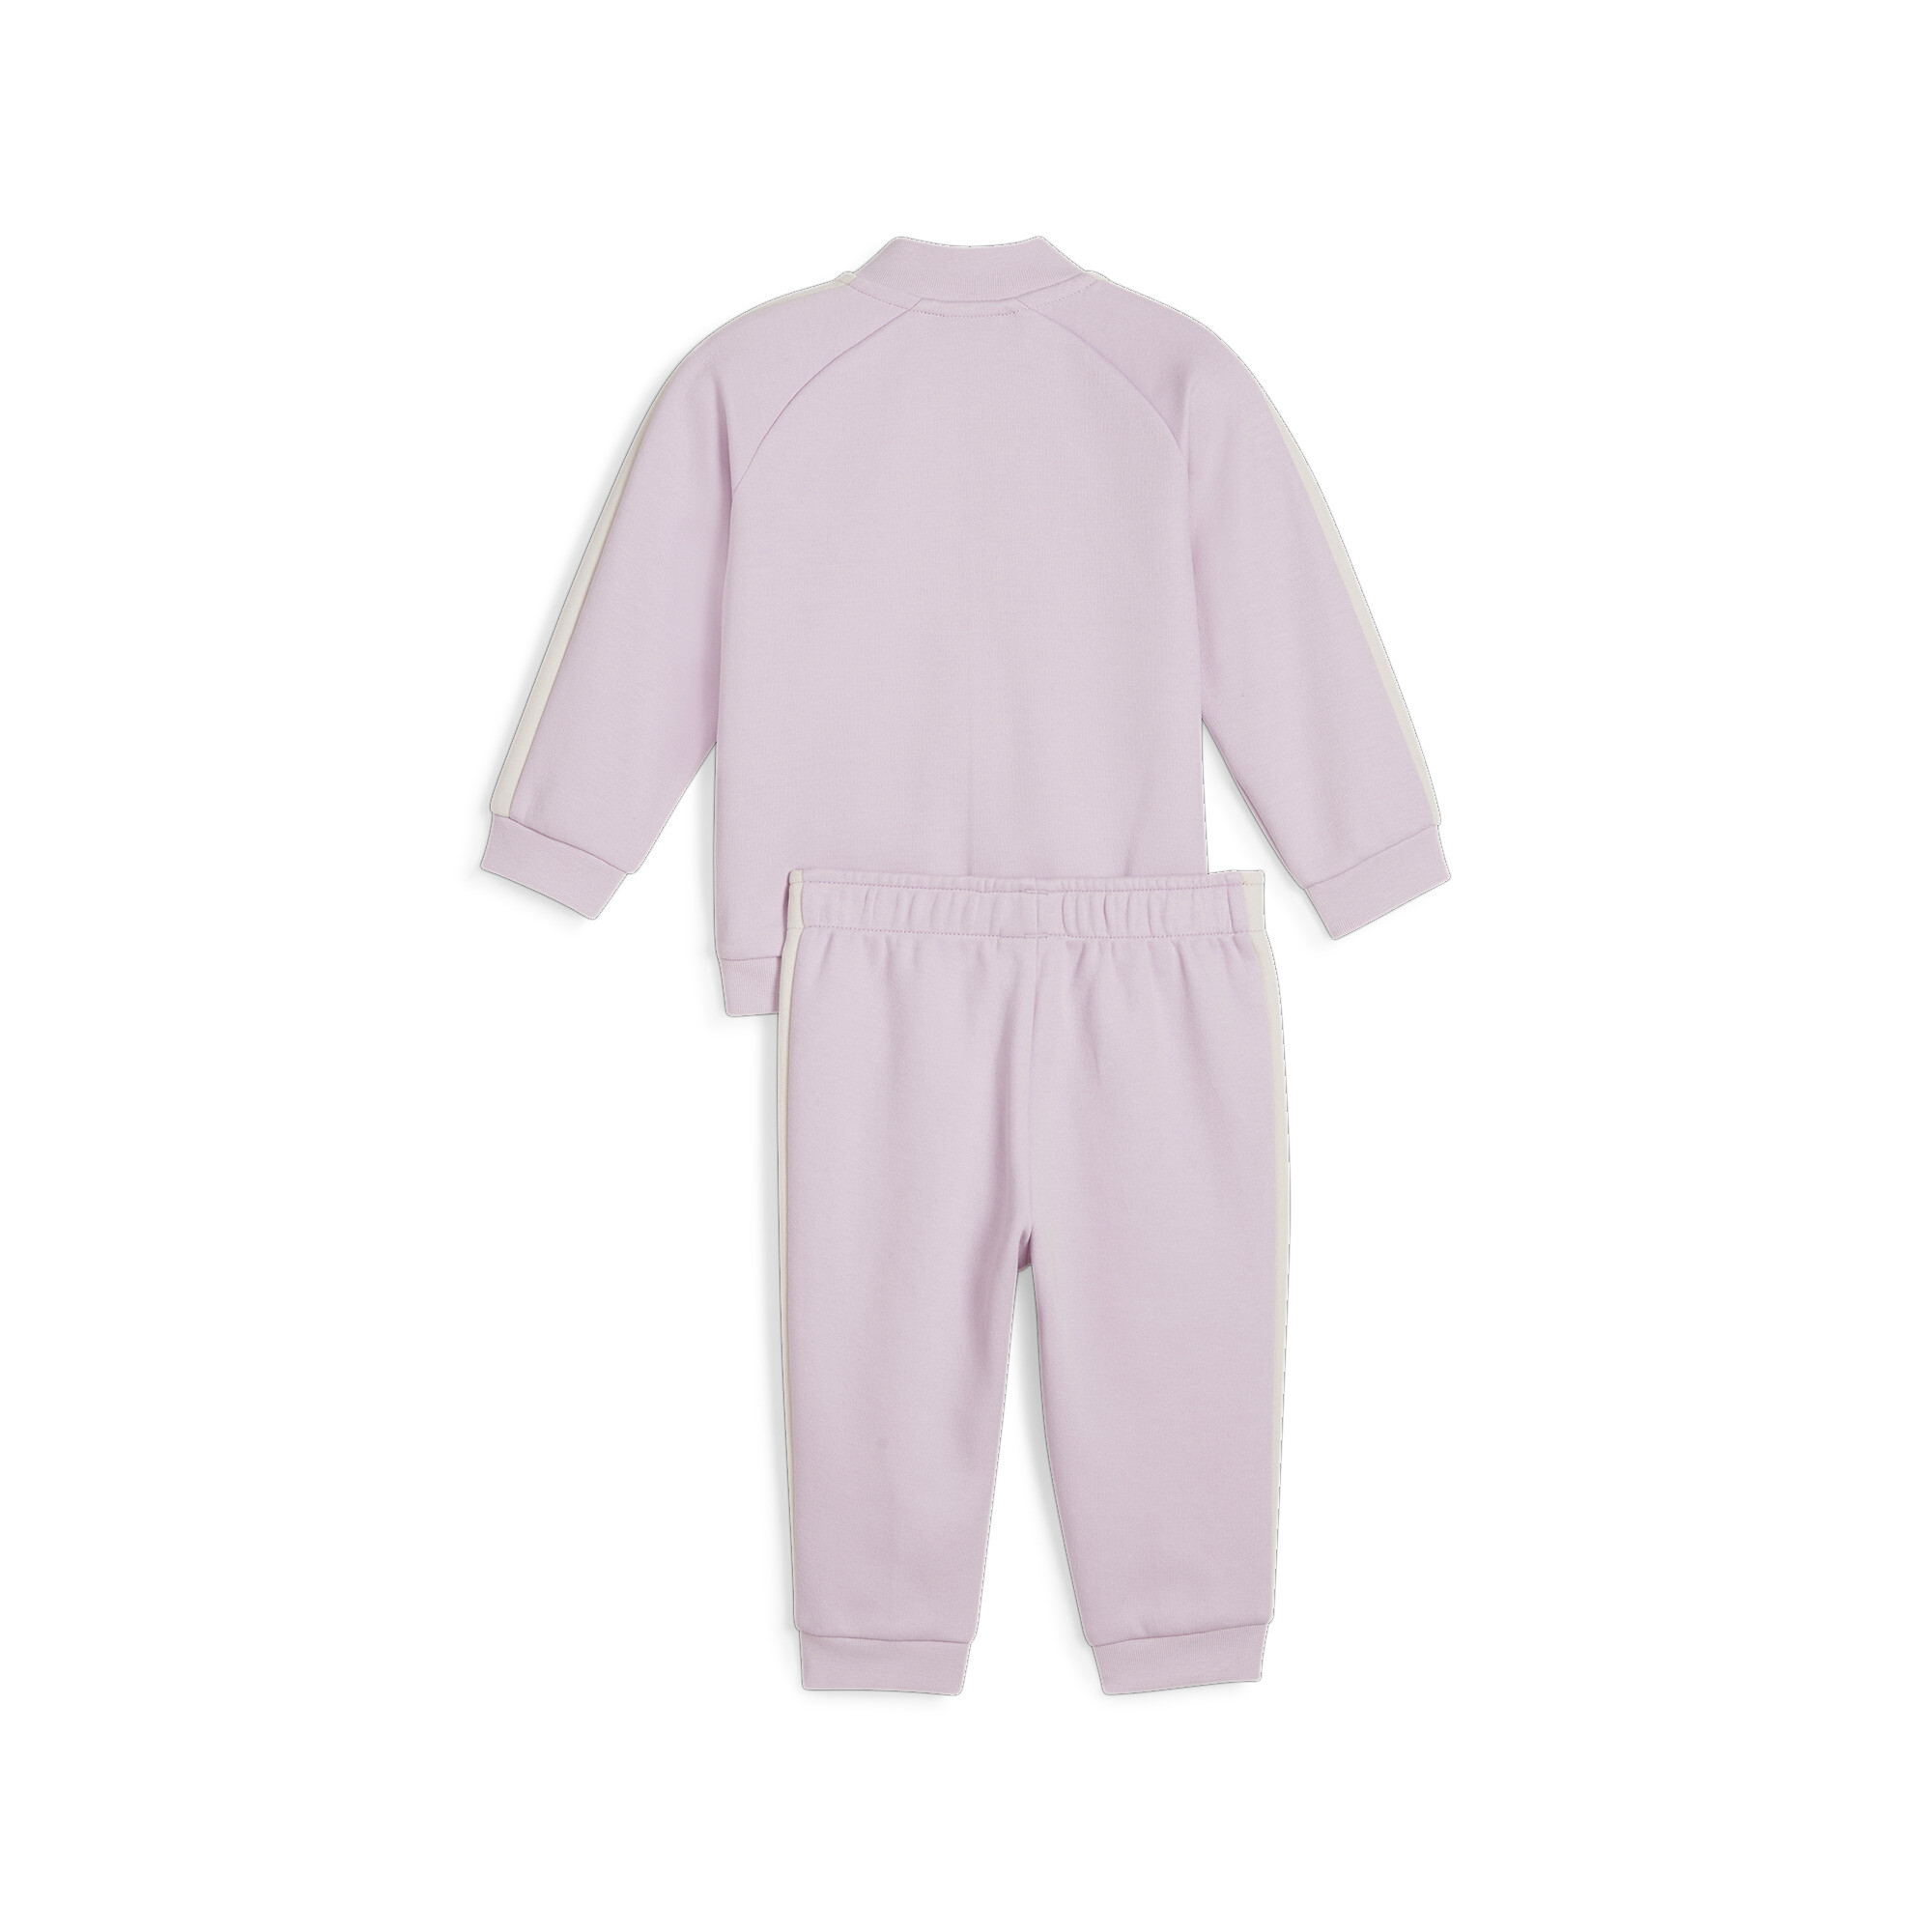 Kids' PUMA MINICATS T7 ICONIC Baby Tracksuit Set In Purple, Size 12-18 Months